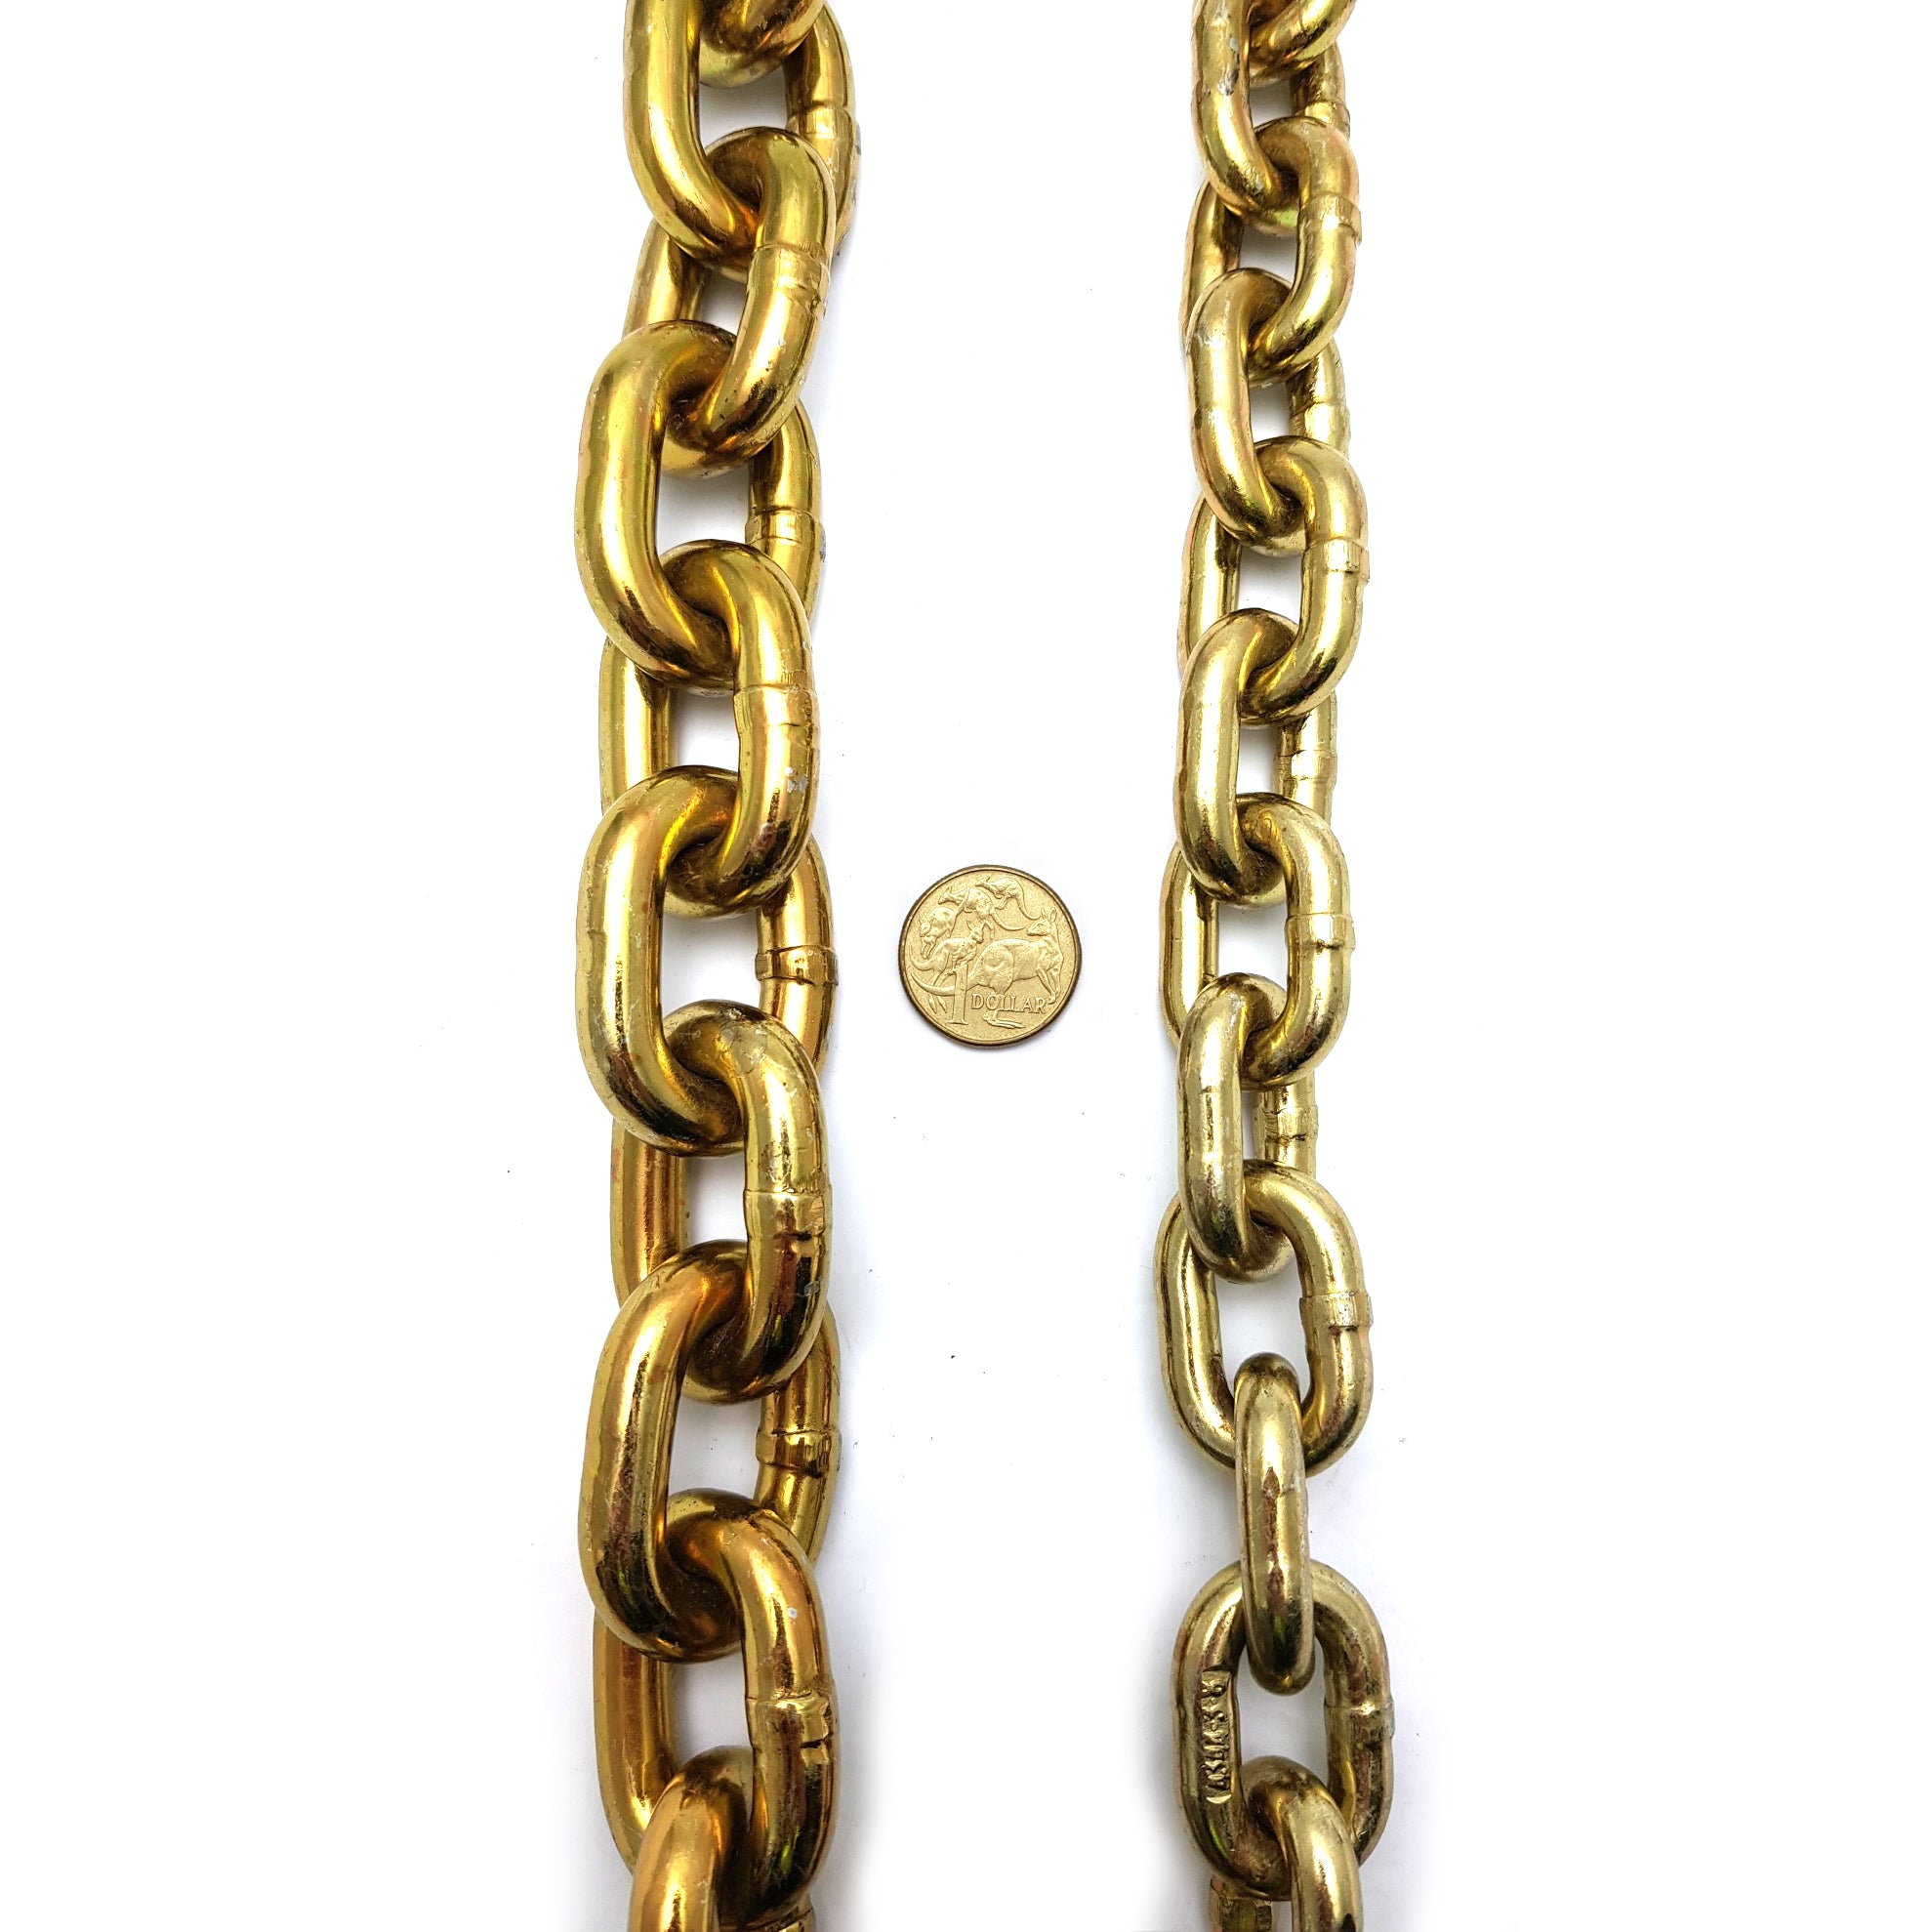 Hardened security chain, size: 10mm and 8mm, order by the metre. Australia wide delivery.